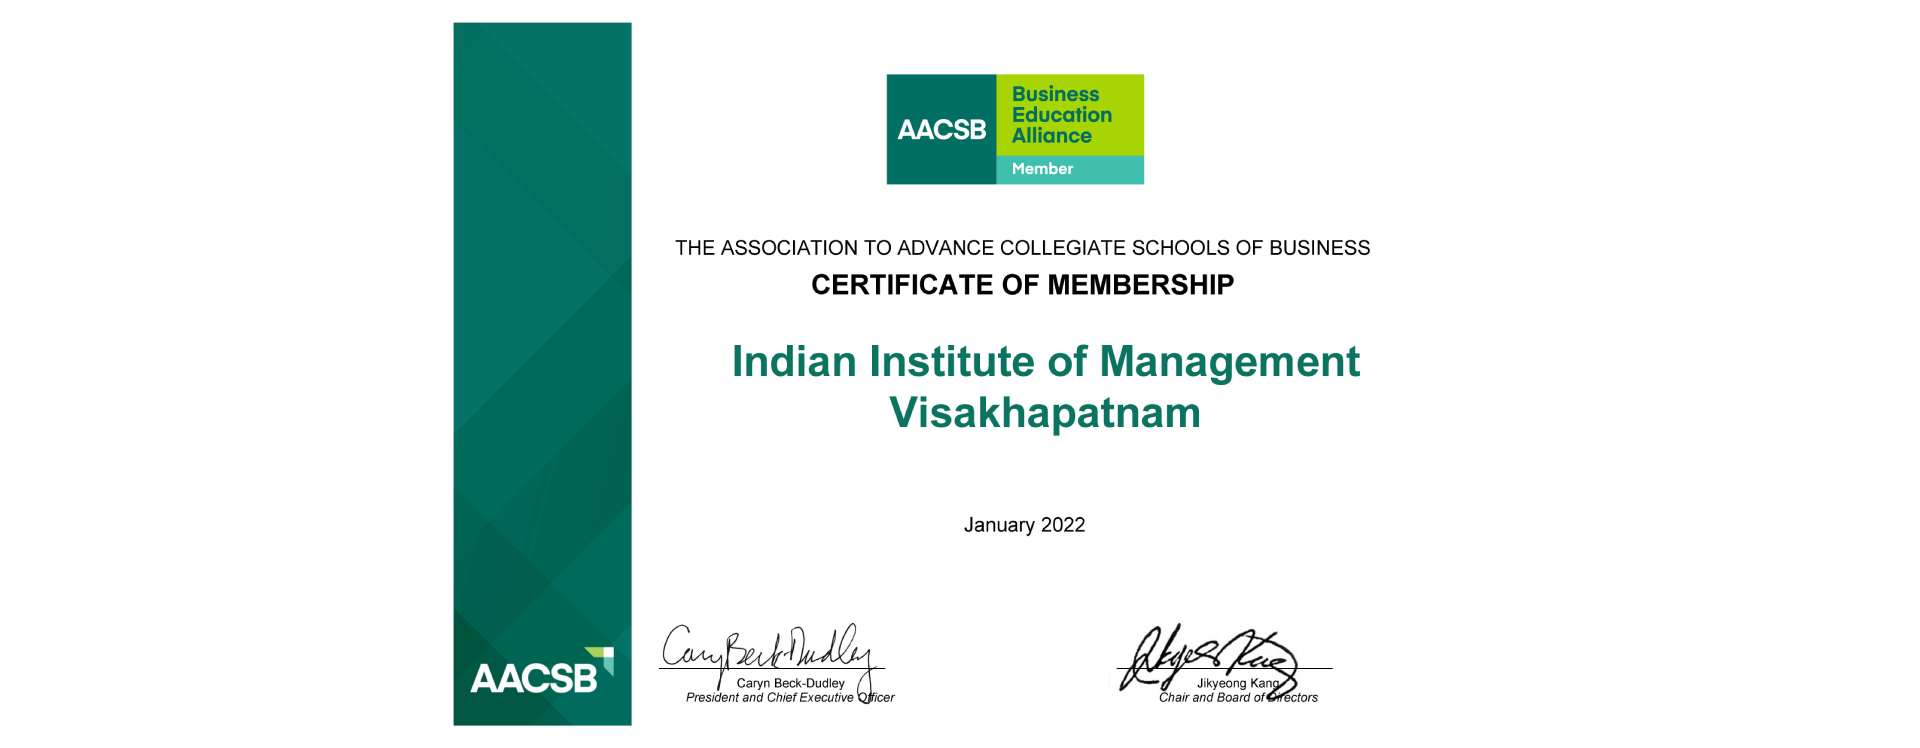 The Institute is pleased to announce that it is now <br>a Business Education Alliance Member of the AACSB, <br>which is the largest global network of business educators.